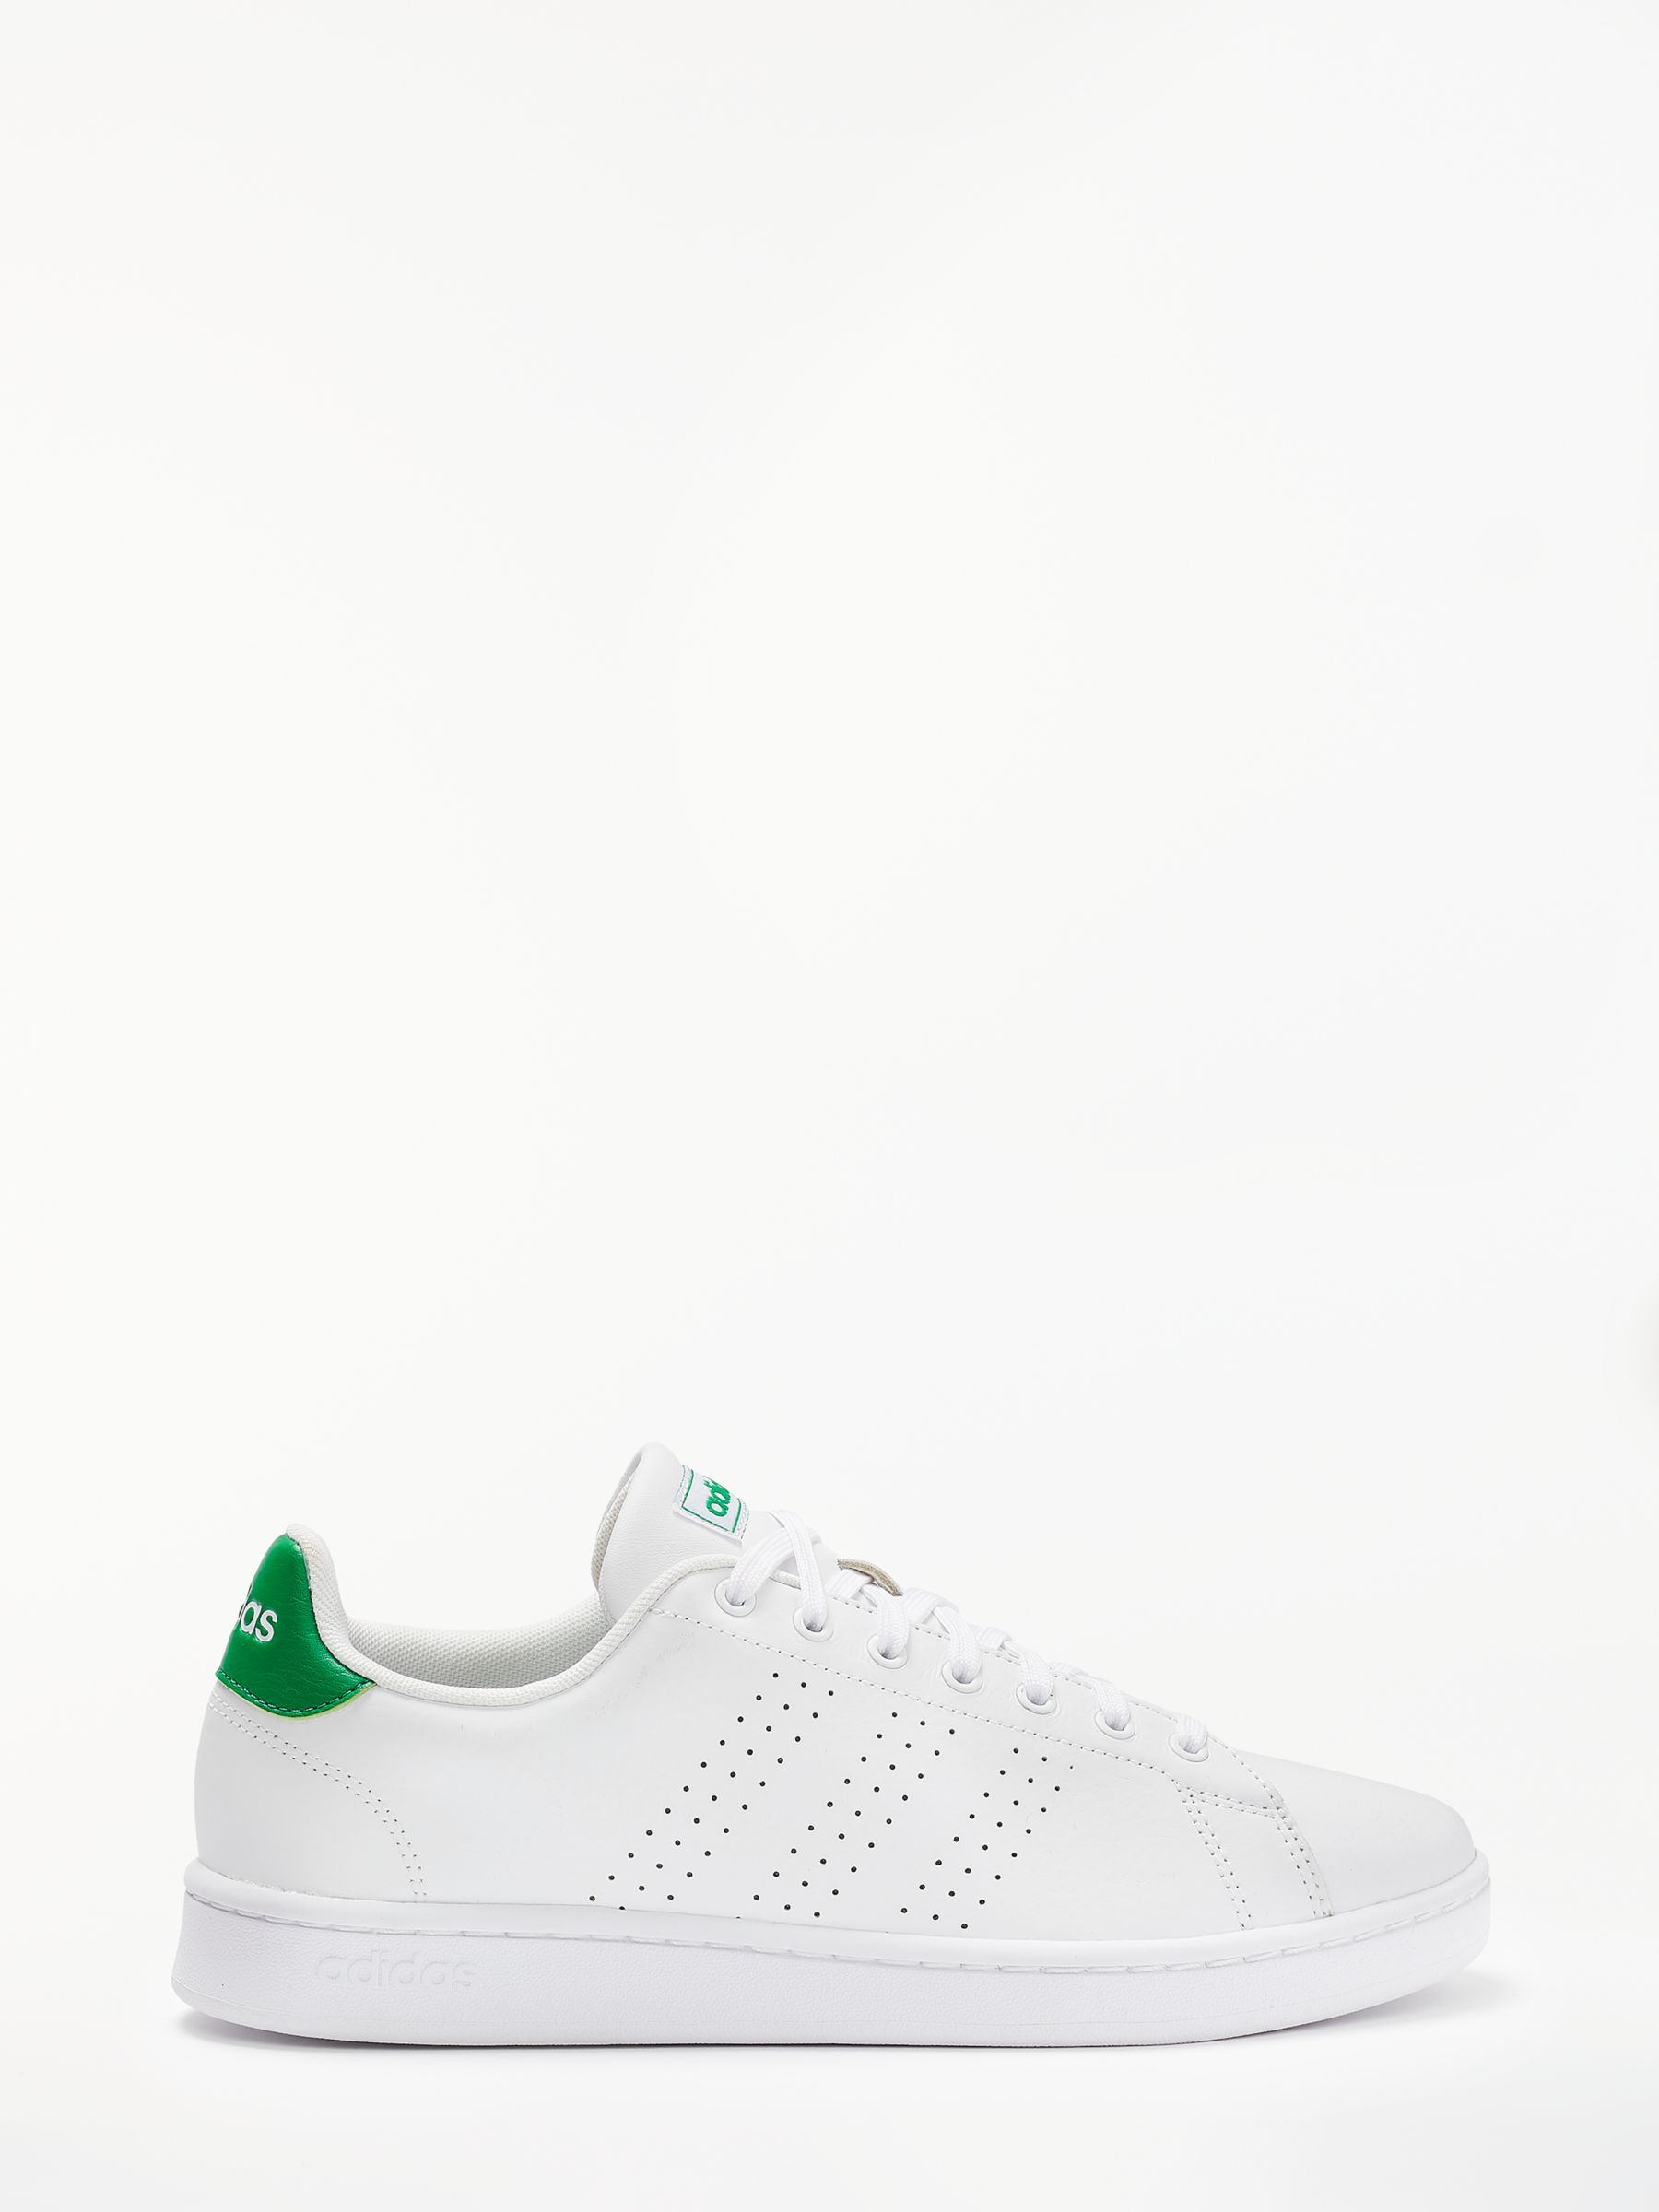 adidas green white trainers